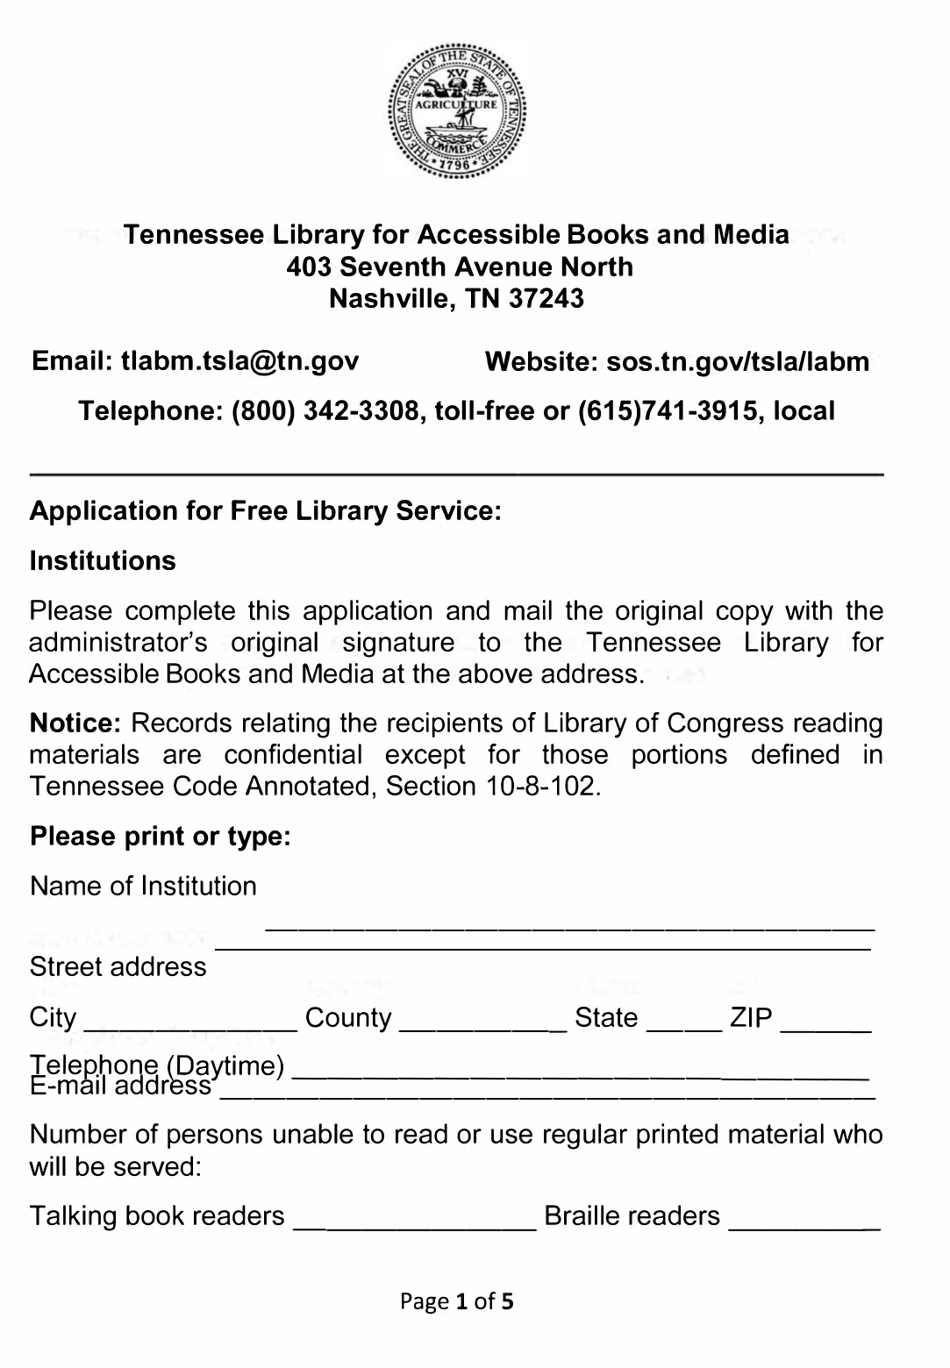 Application for Free Library Service - Institutions - Tennessee, Page 1